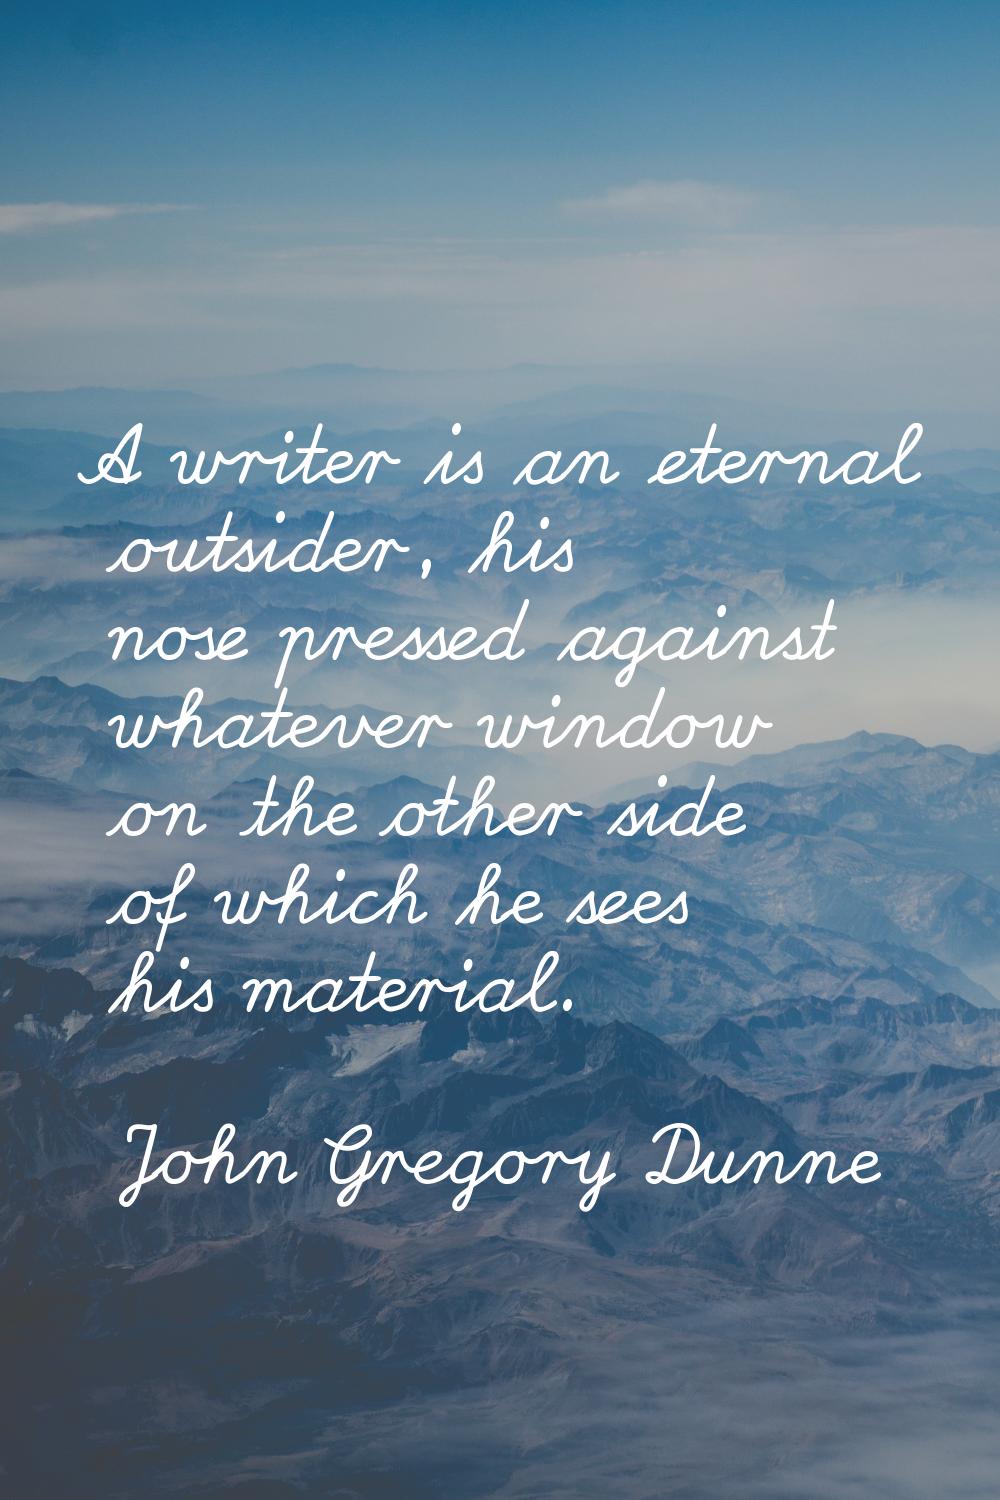 A writer is an eternal outsider, his nose pressed against whatever window on the other side of whic